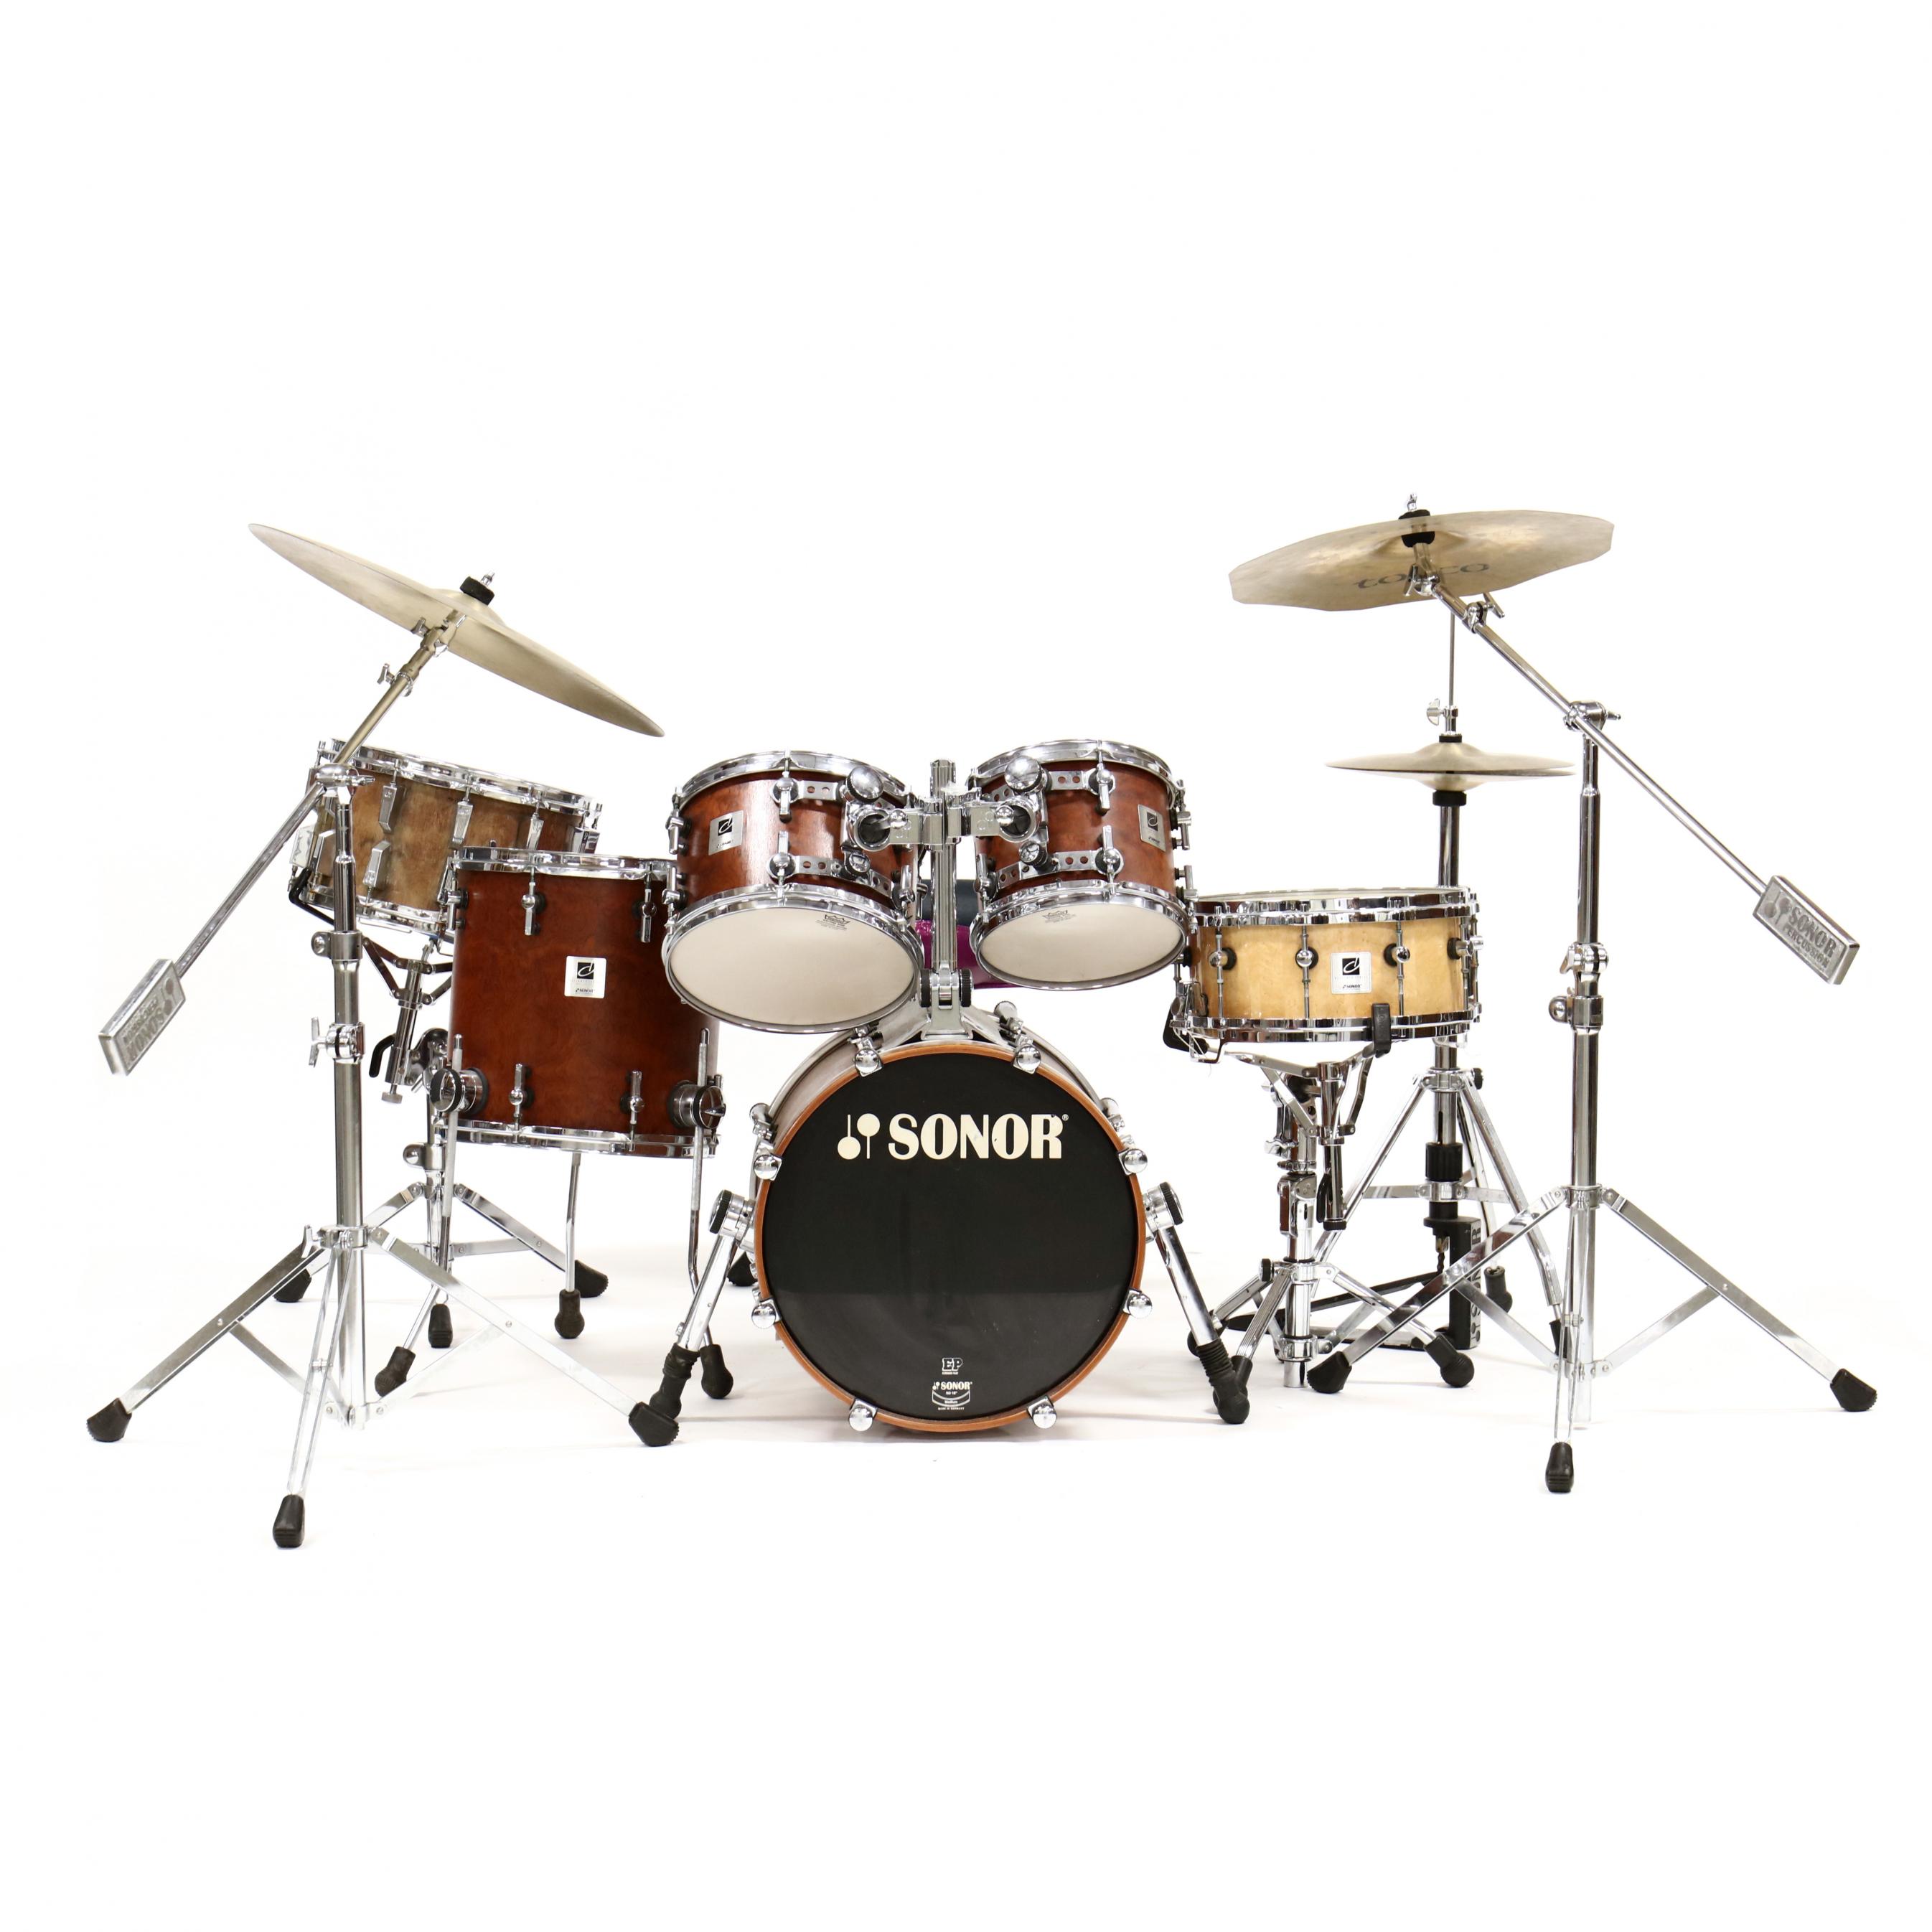 Sonor Drum Set, Made in Germany (Lot 2531 - June Estate AuctionJun